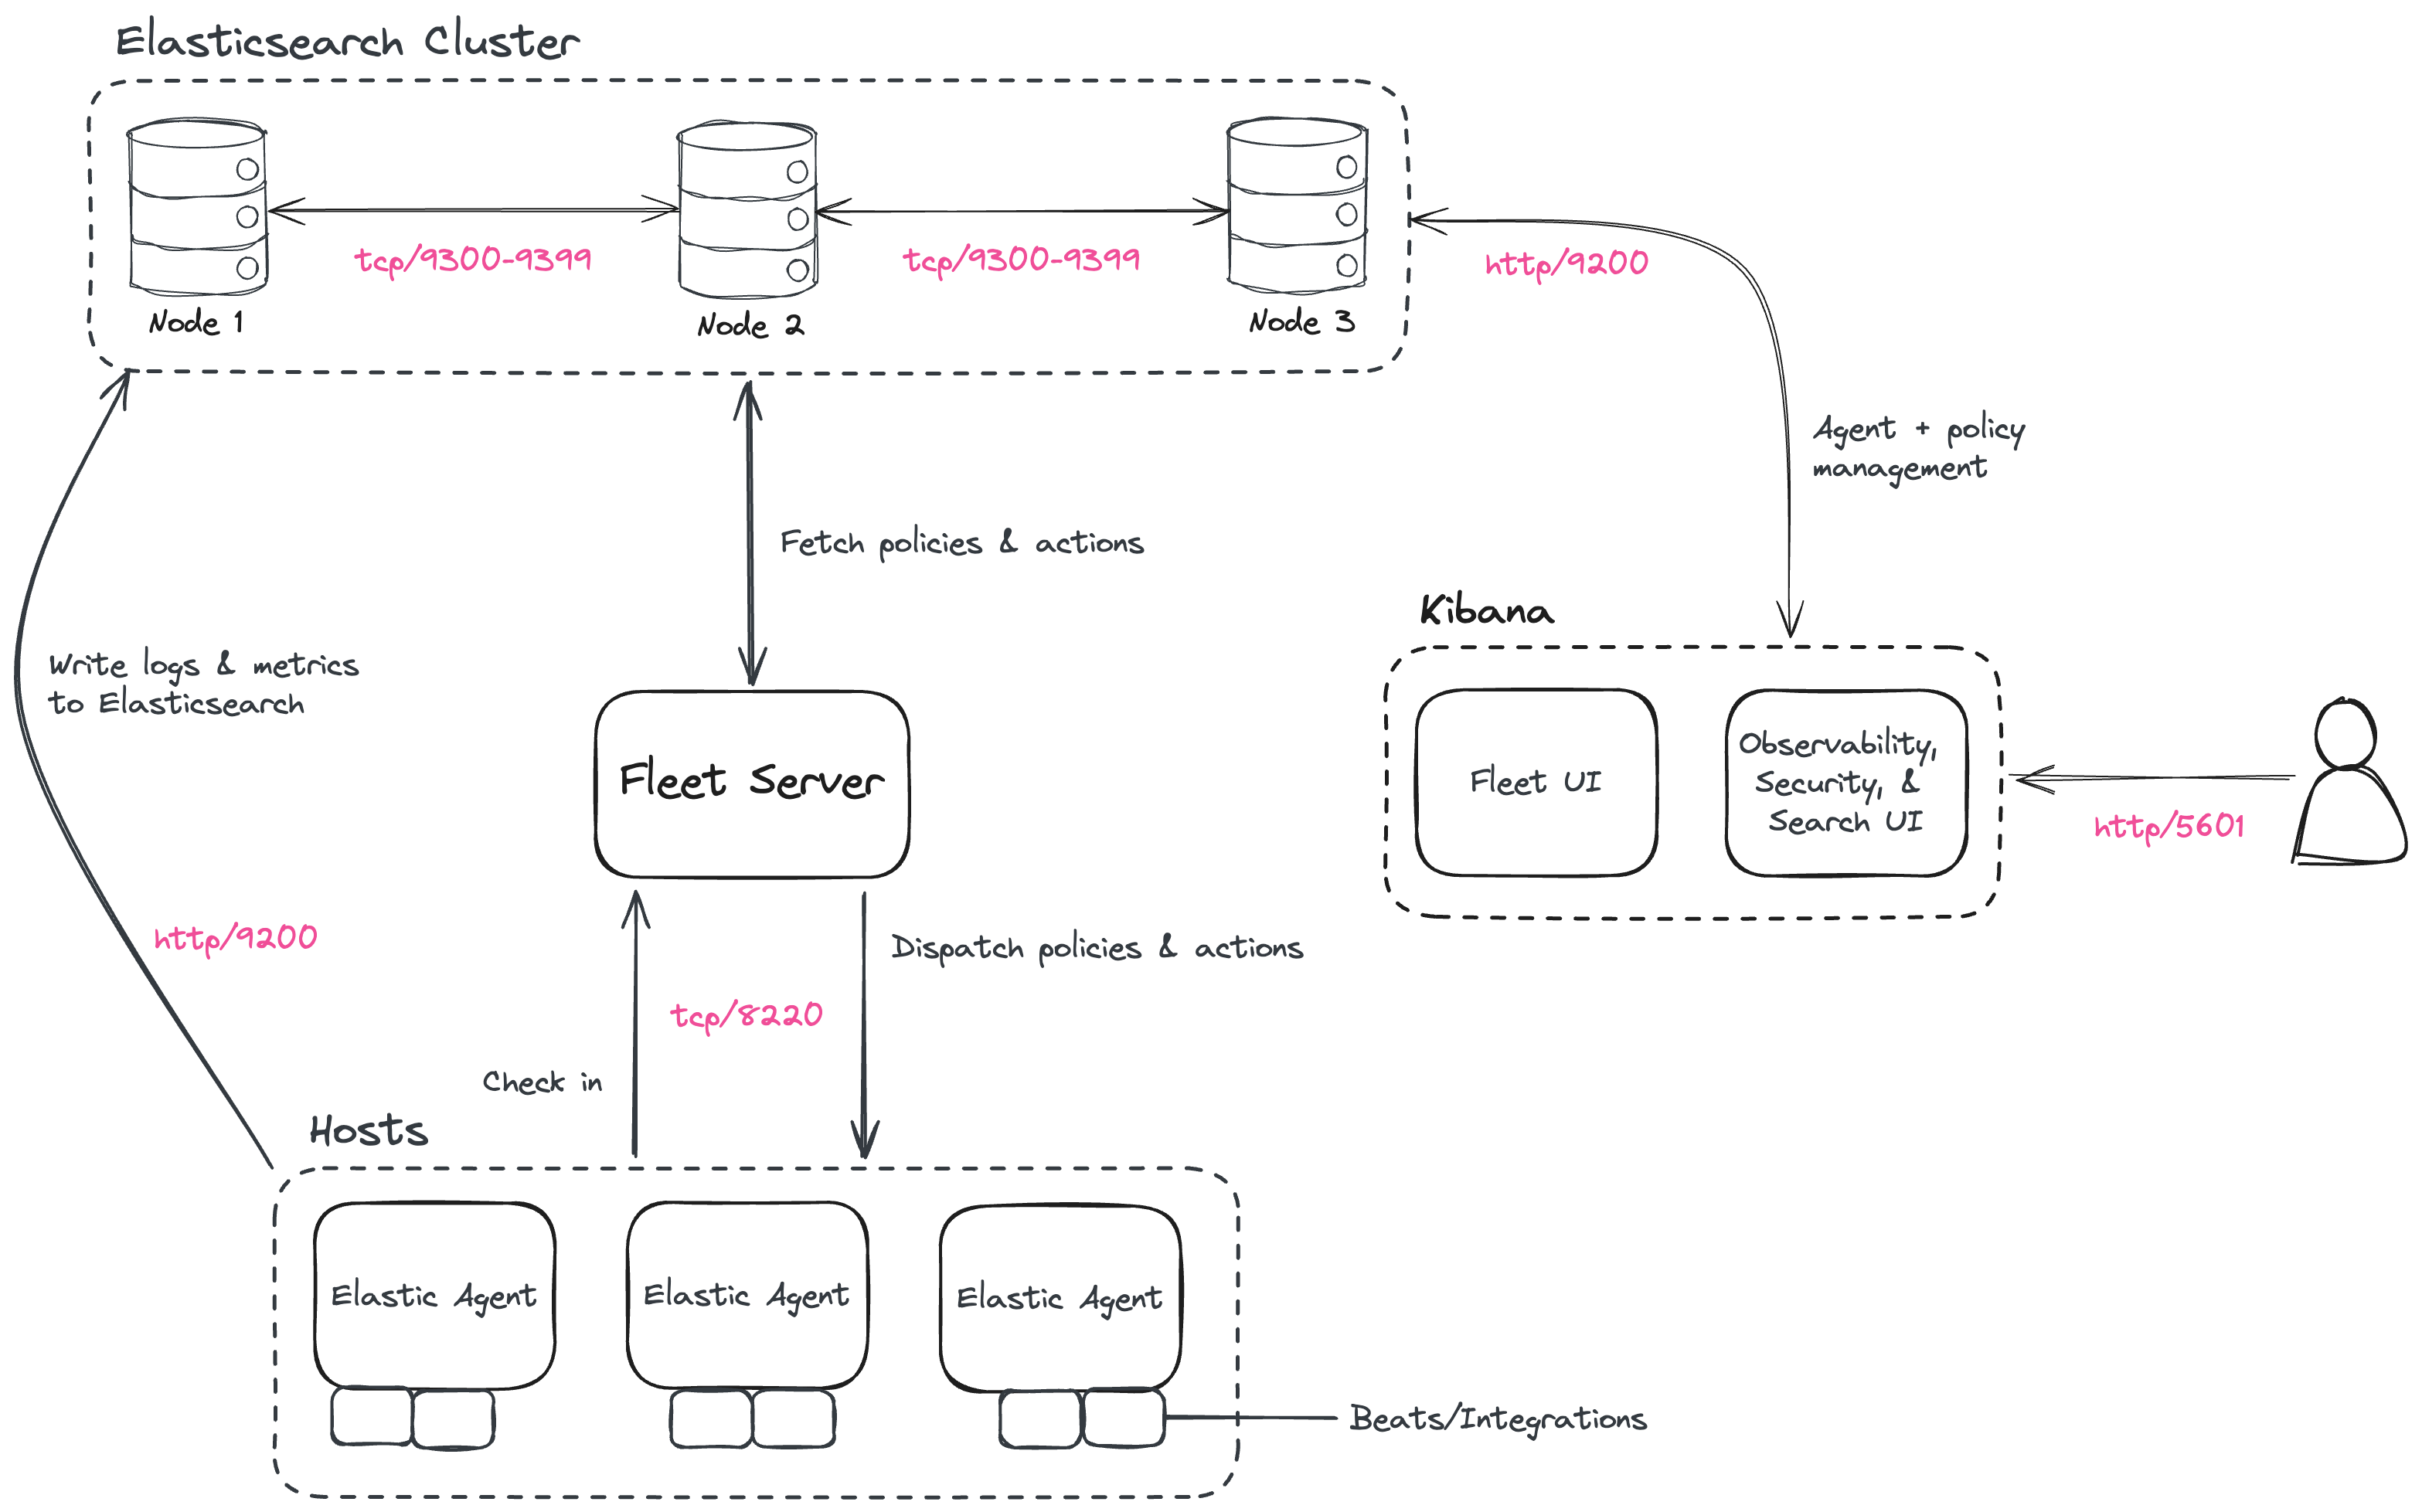 Image showing the relationships between stack components